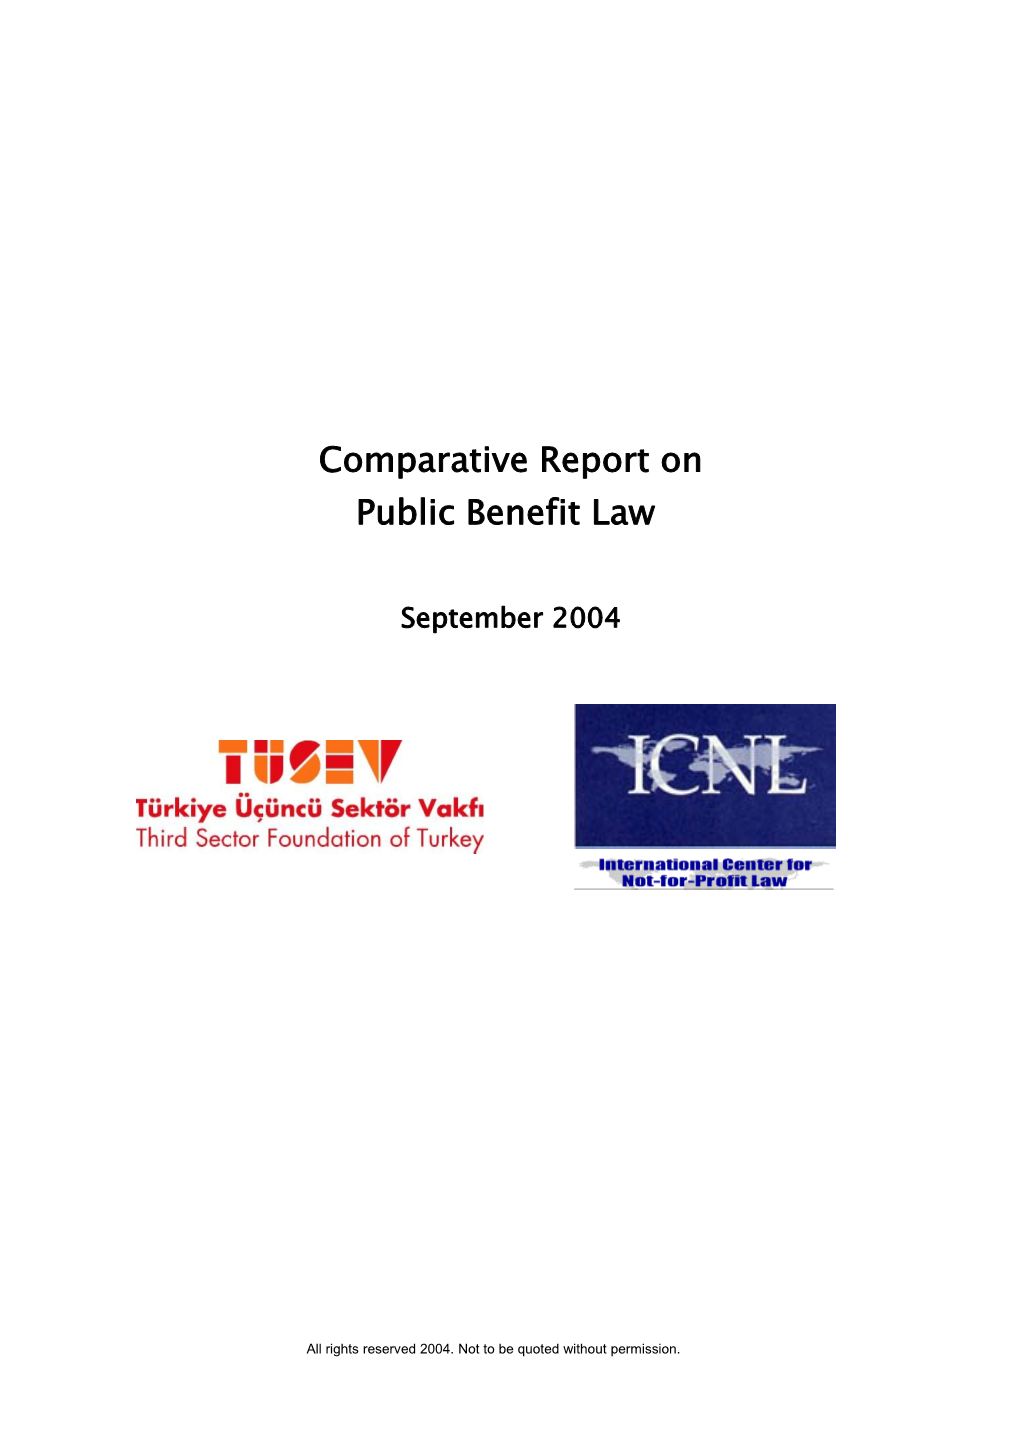 This Is the First White Paper Produced by ICNL for TUSEV S Comparative Report Project